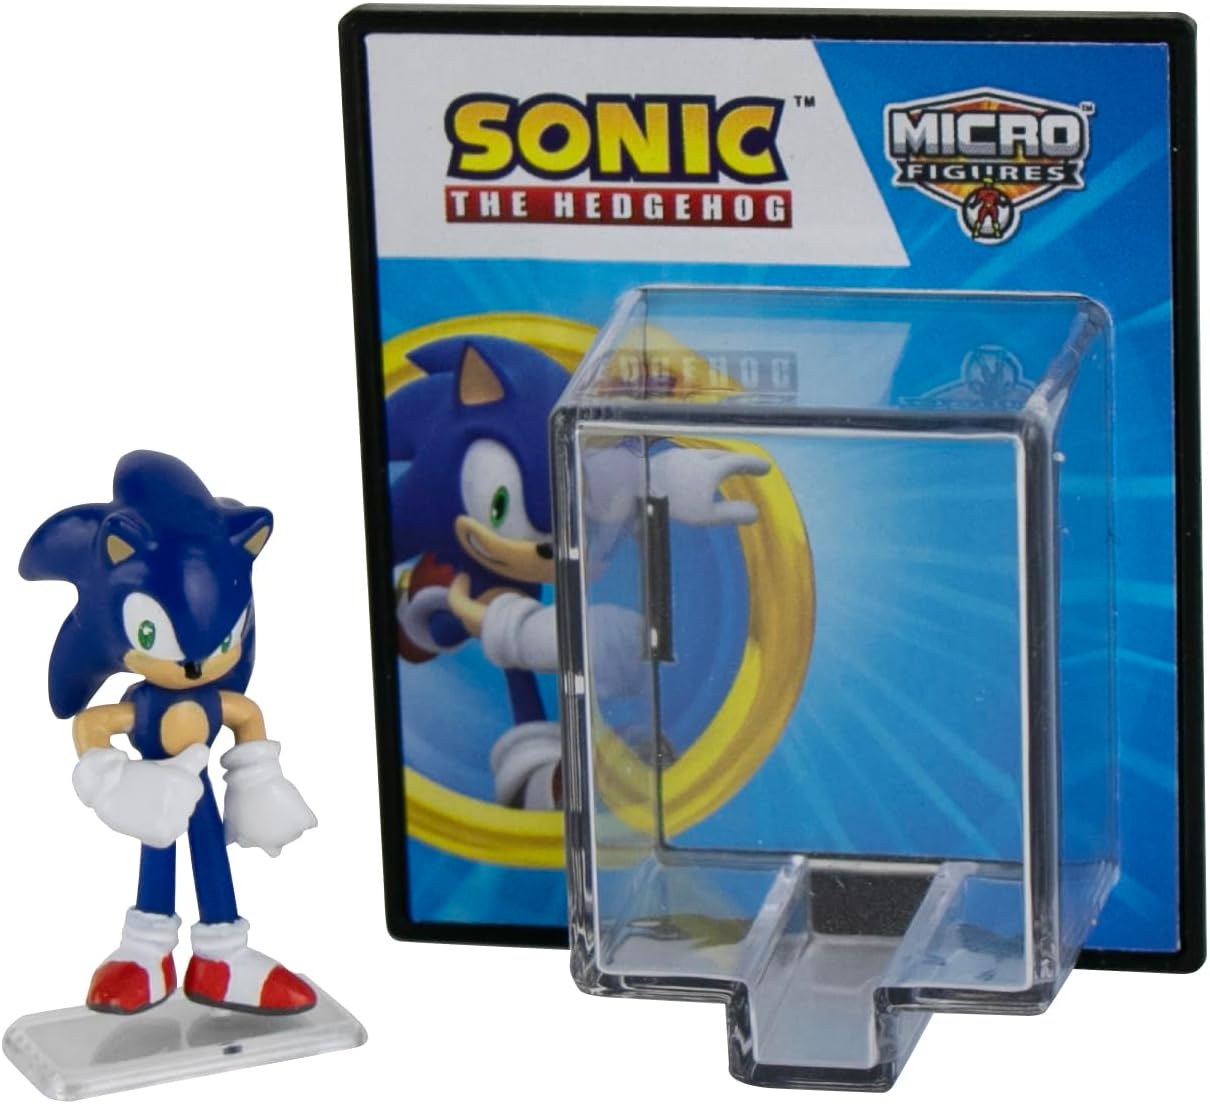 World's Smallest Sonic the Hedg